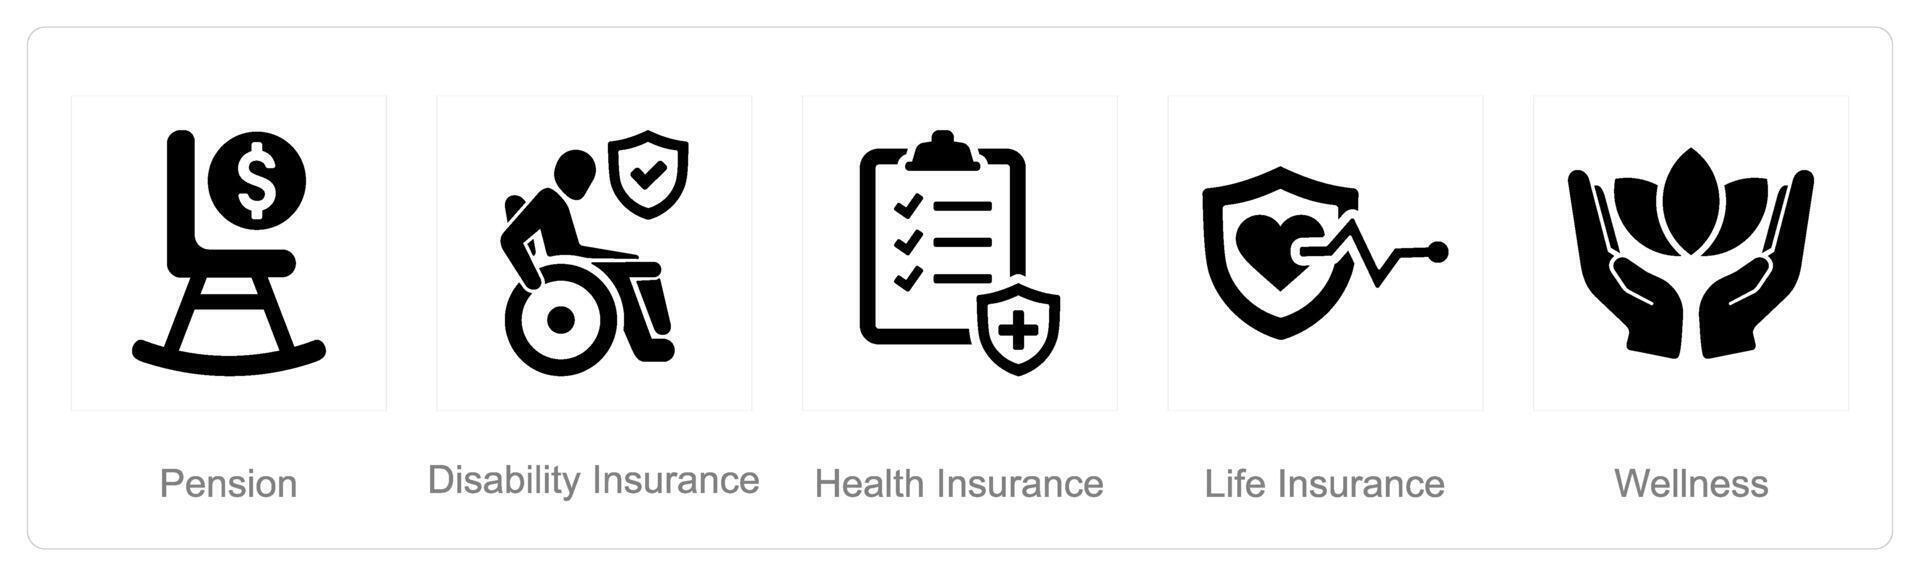 A set of 5 Employee Benefits icons as pension, disability insurance, health insurance vector